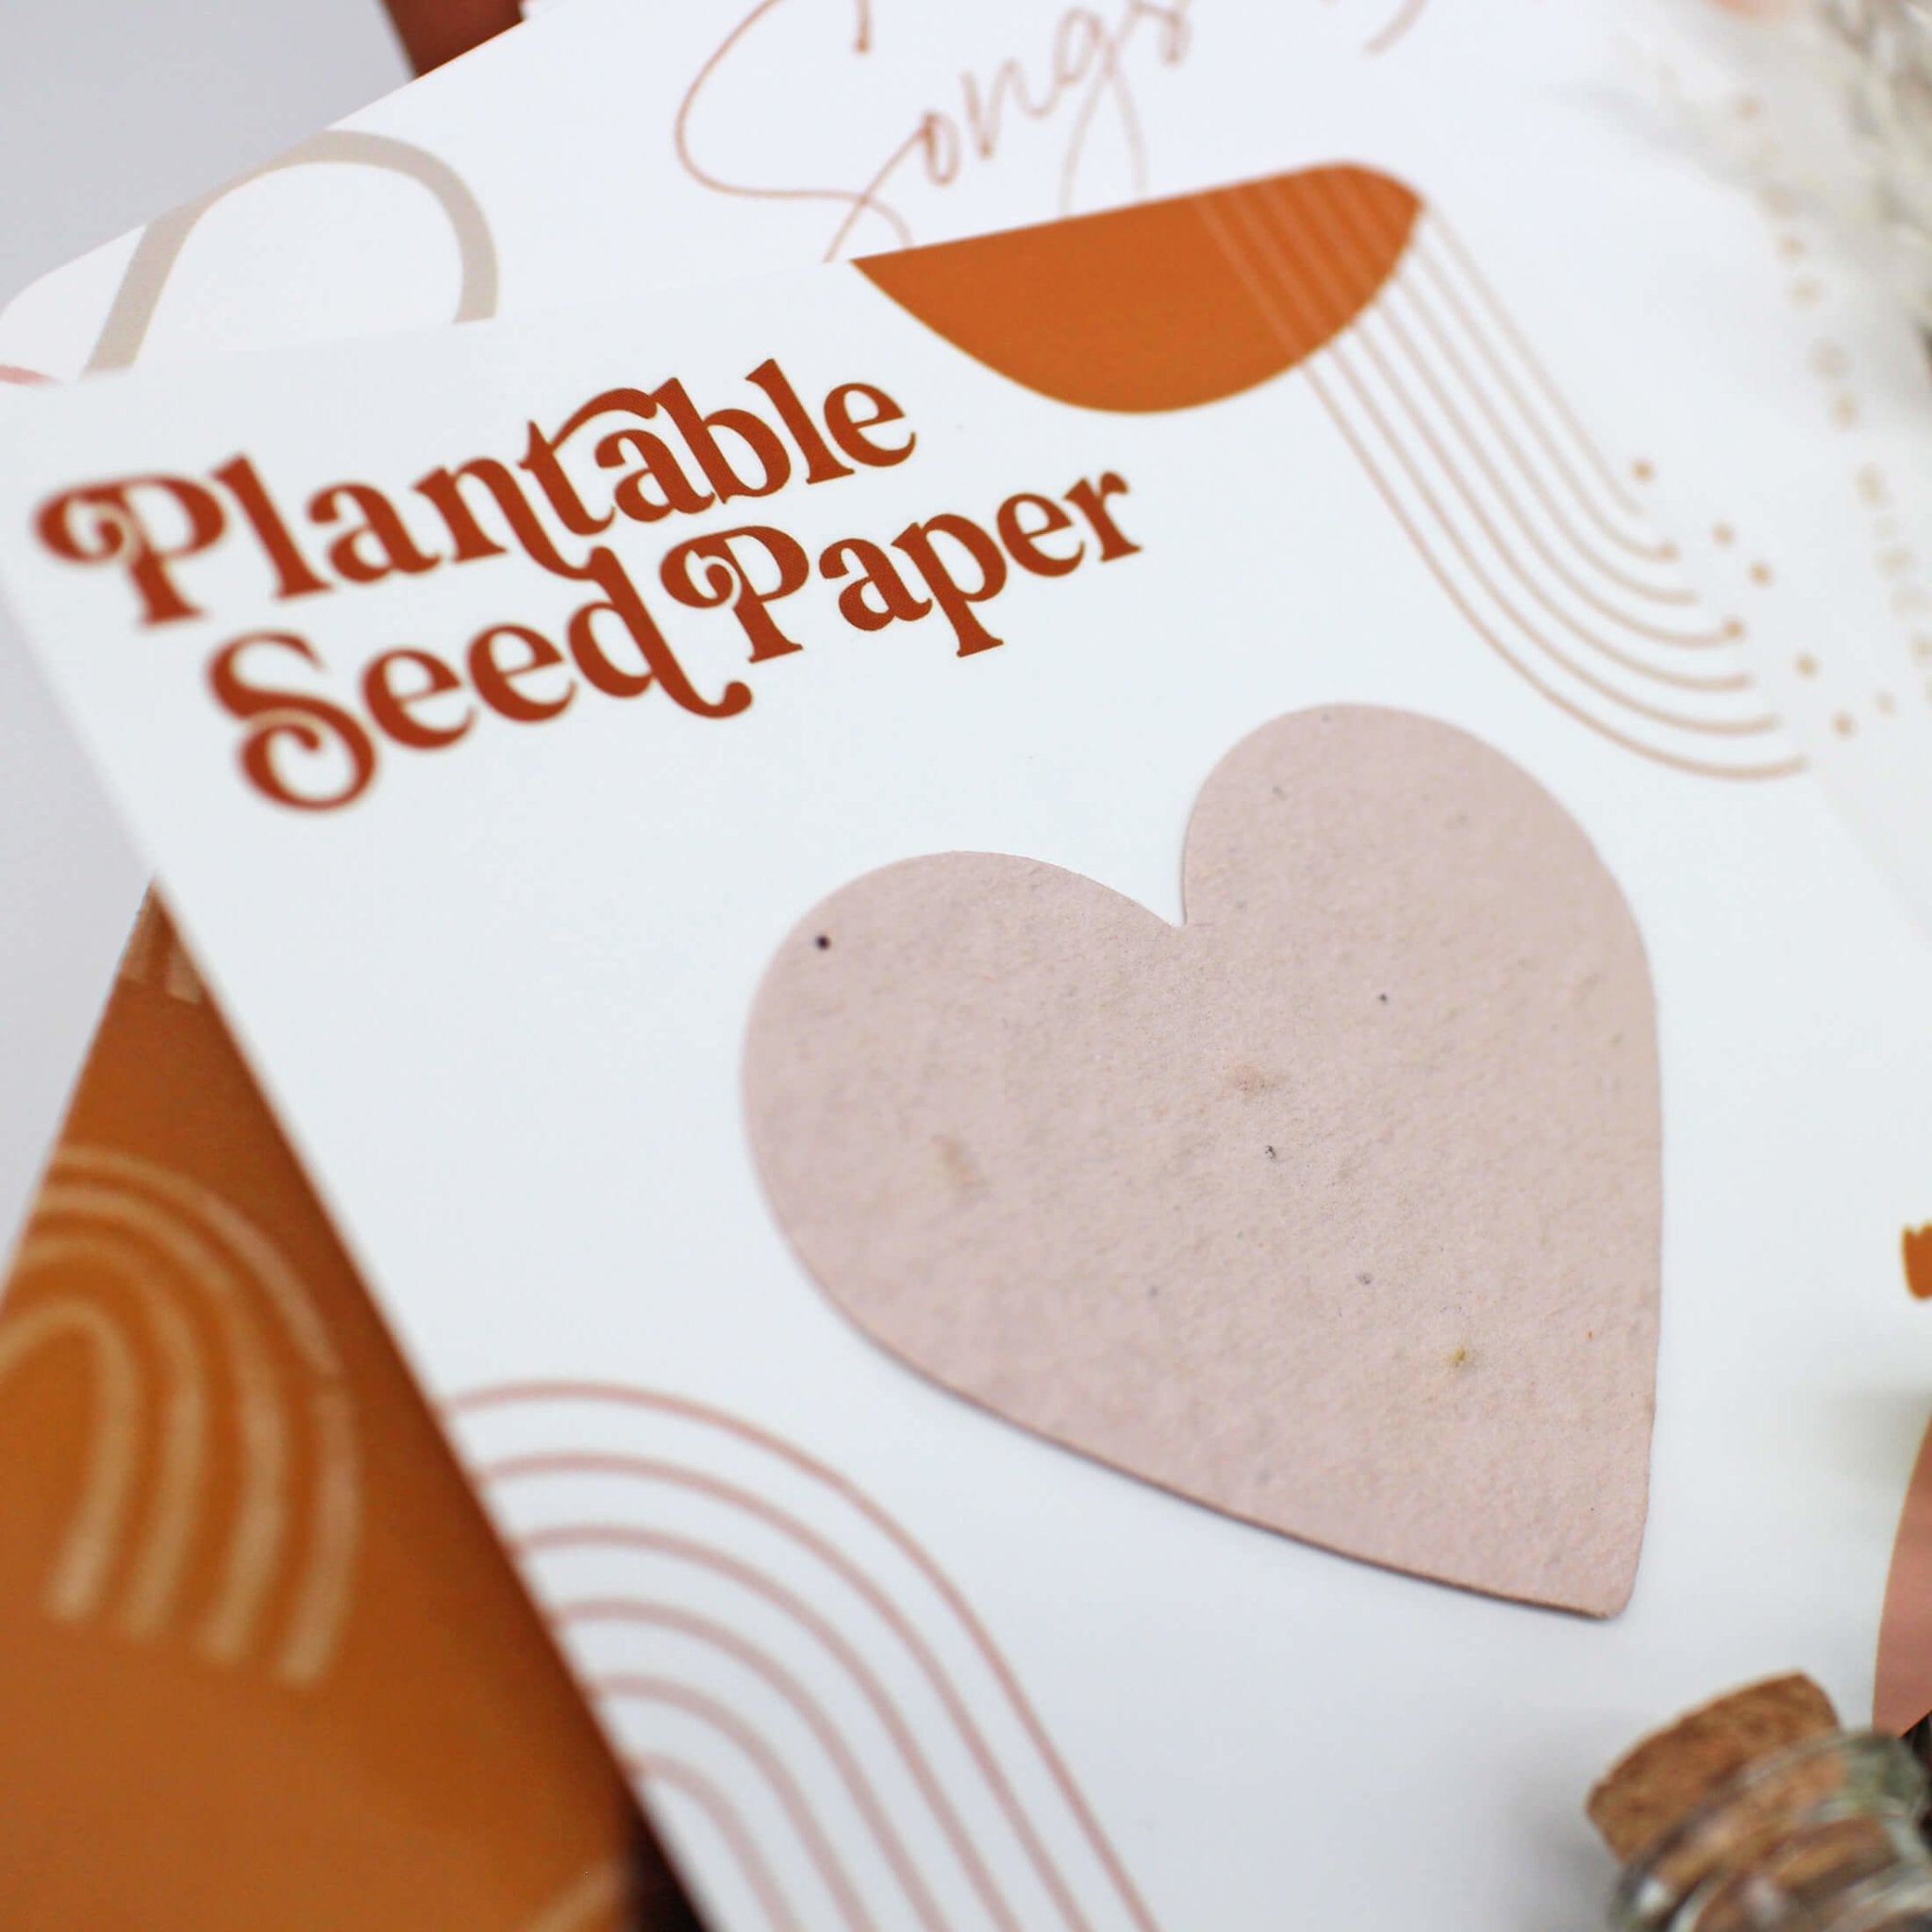 Plantable Seed Paper Heart